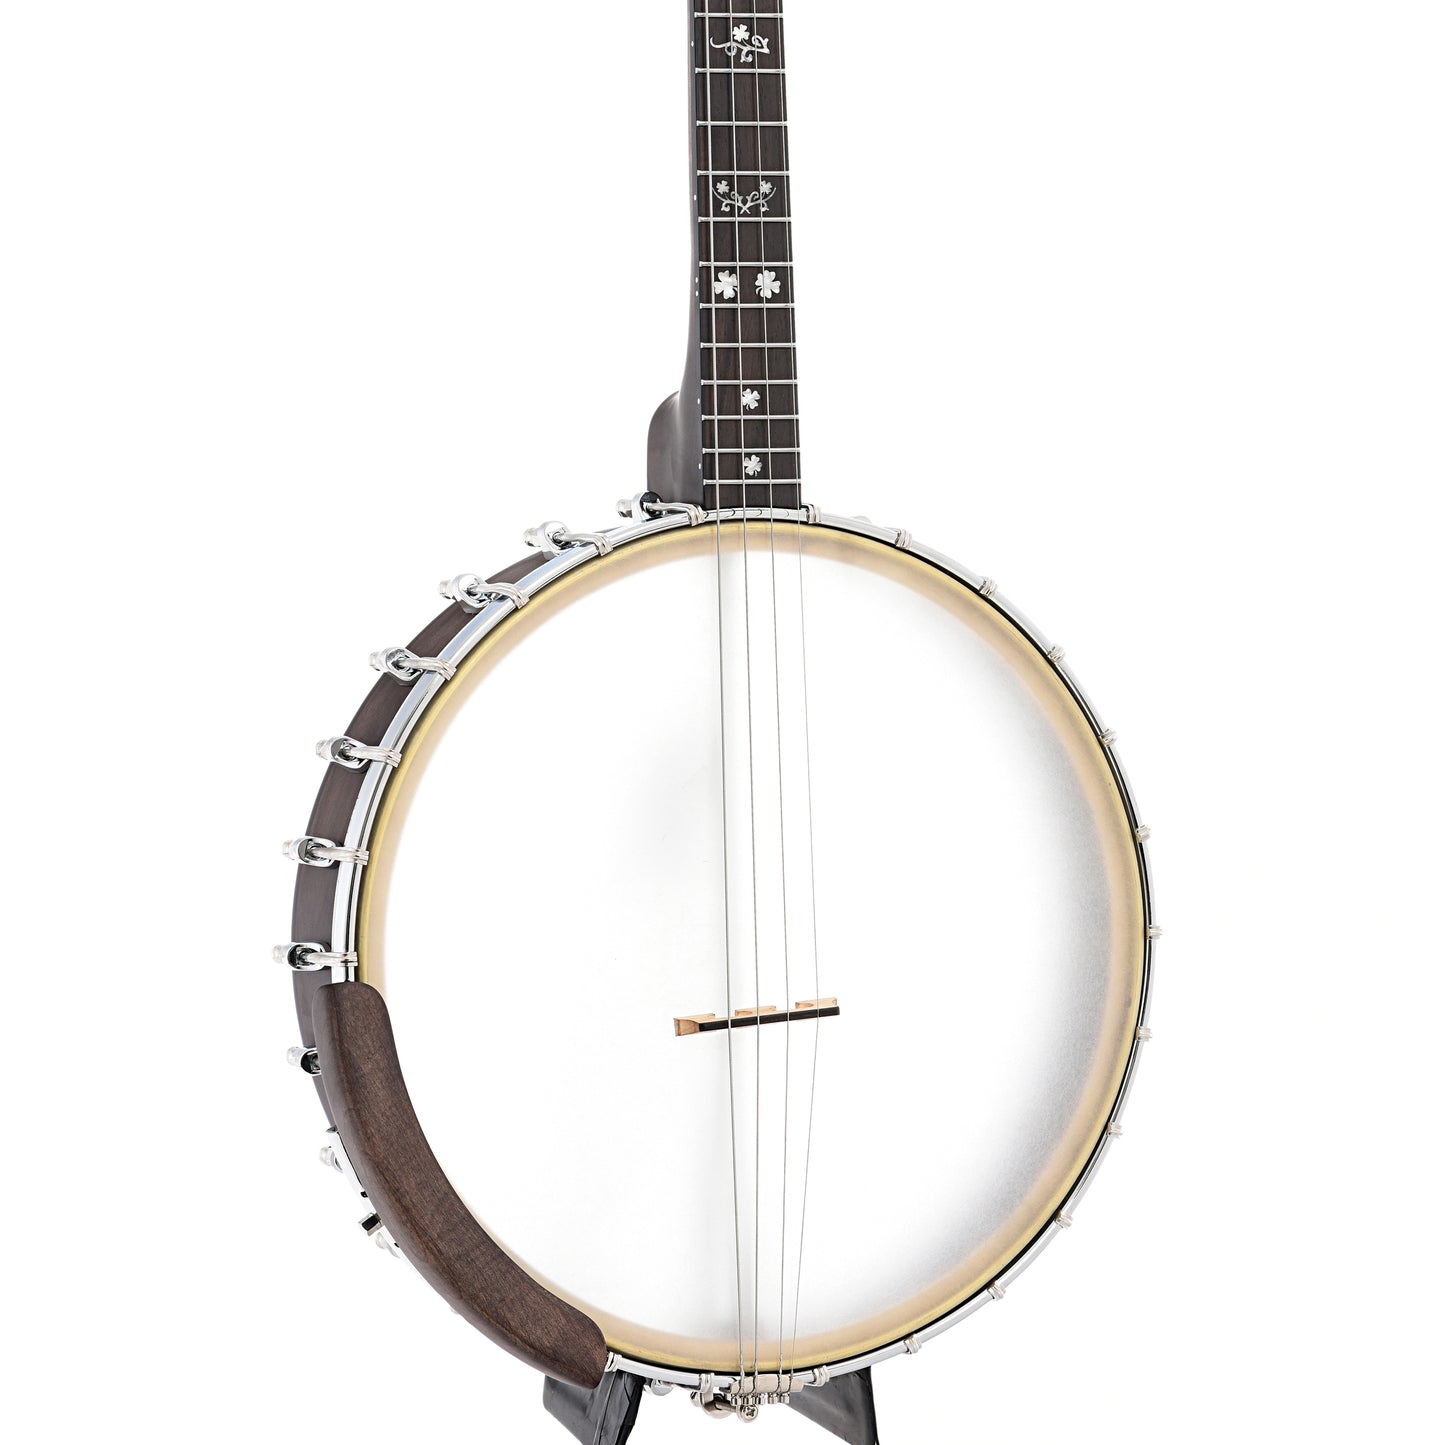 Front and side of Gold Tone Tenor Banjo & Gigbag, 12" Rim, 17 Frets